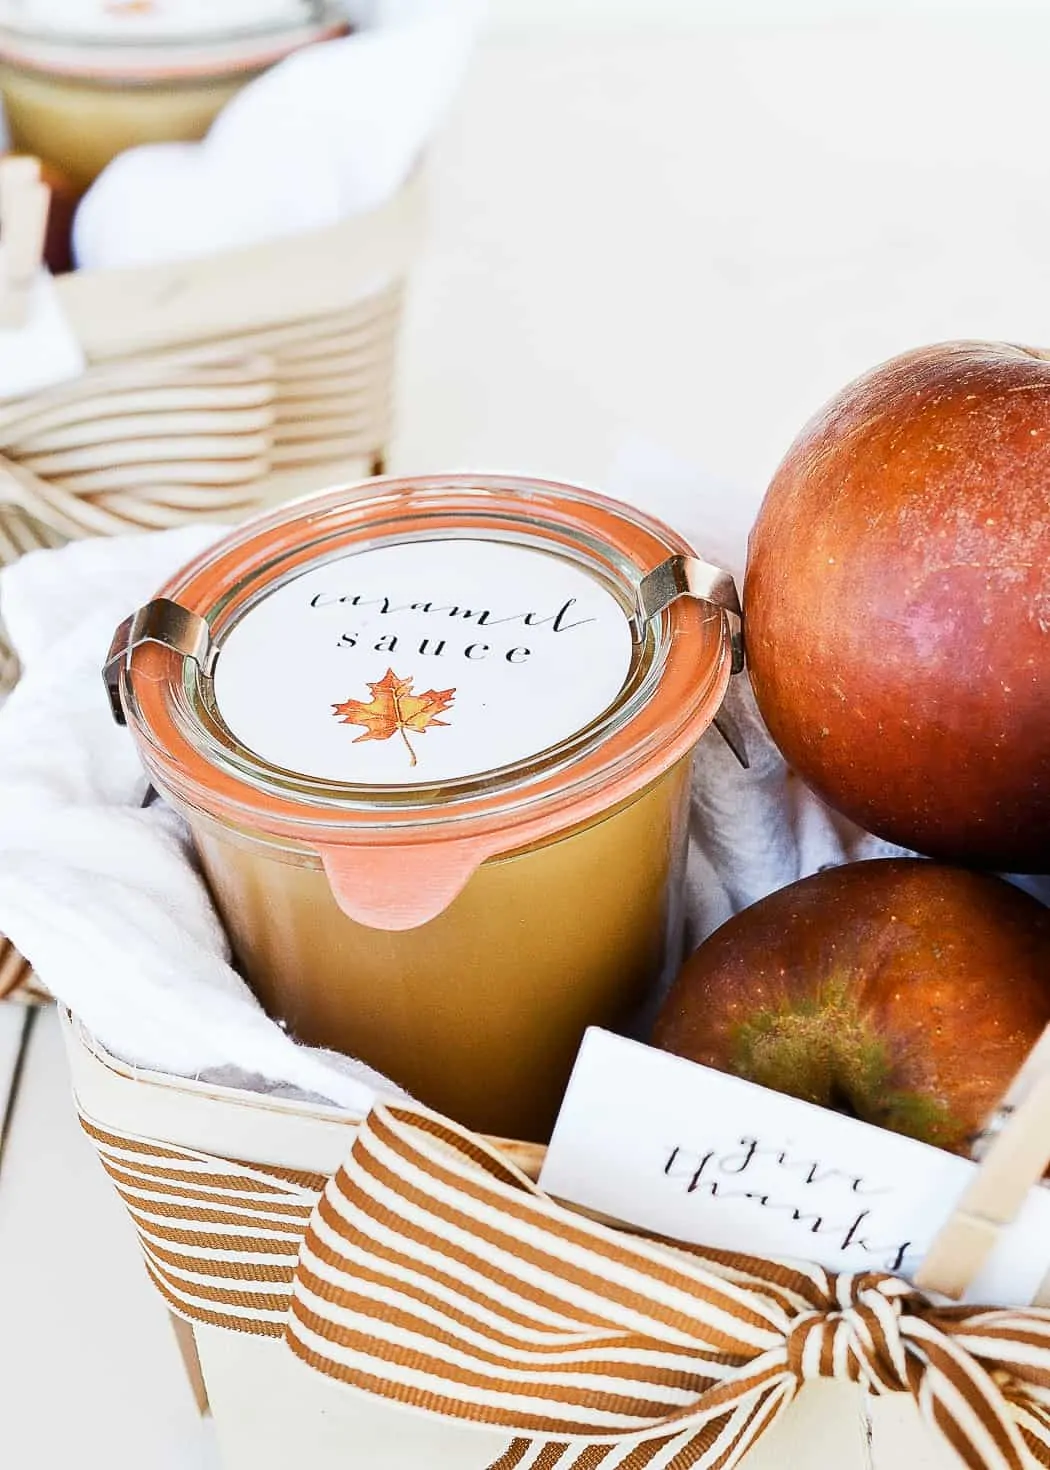 Searching for great thanksgiving gift ideas? Make up a bath of homemade caramel and give with a basket of apples and darling fall tea towel! This inexpensive hostess gift is the perfect thanksgiving gift!